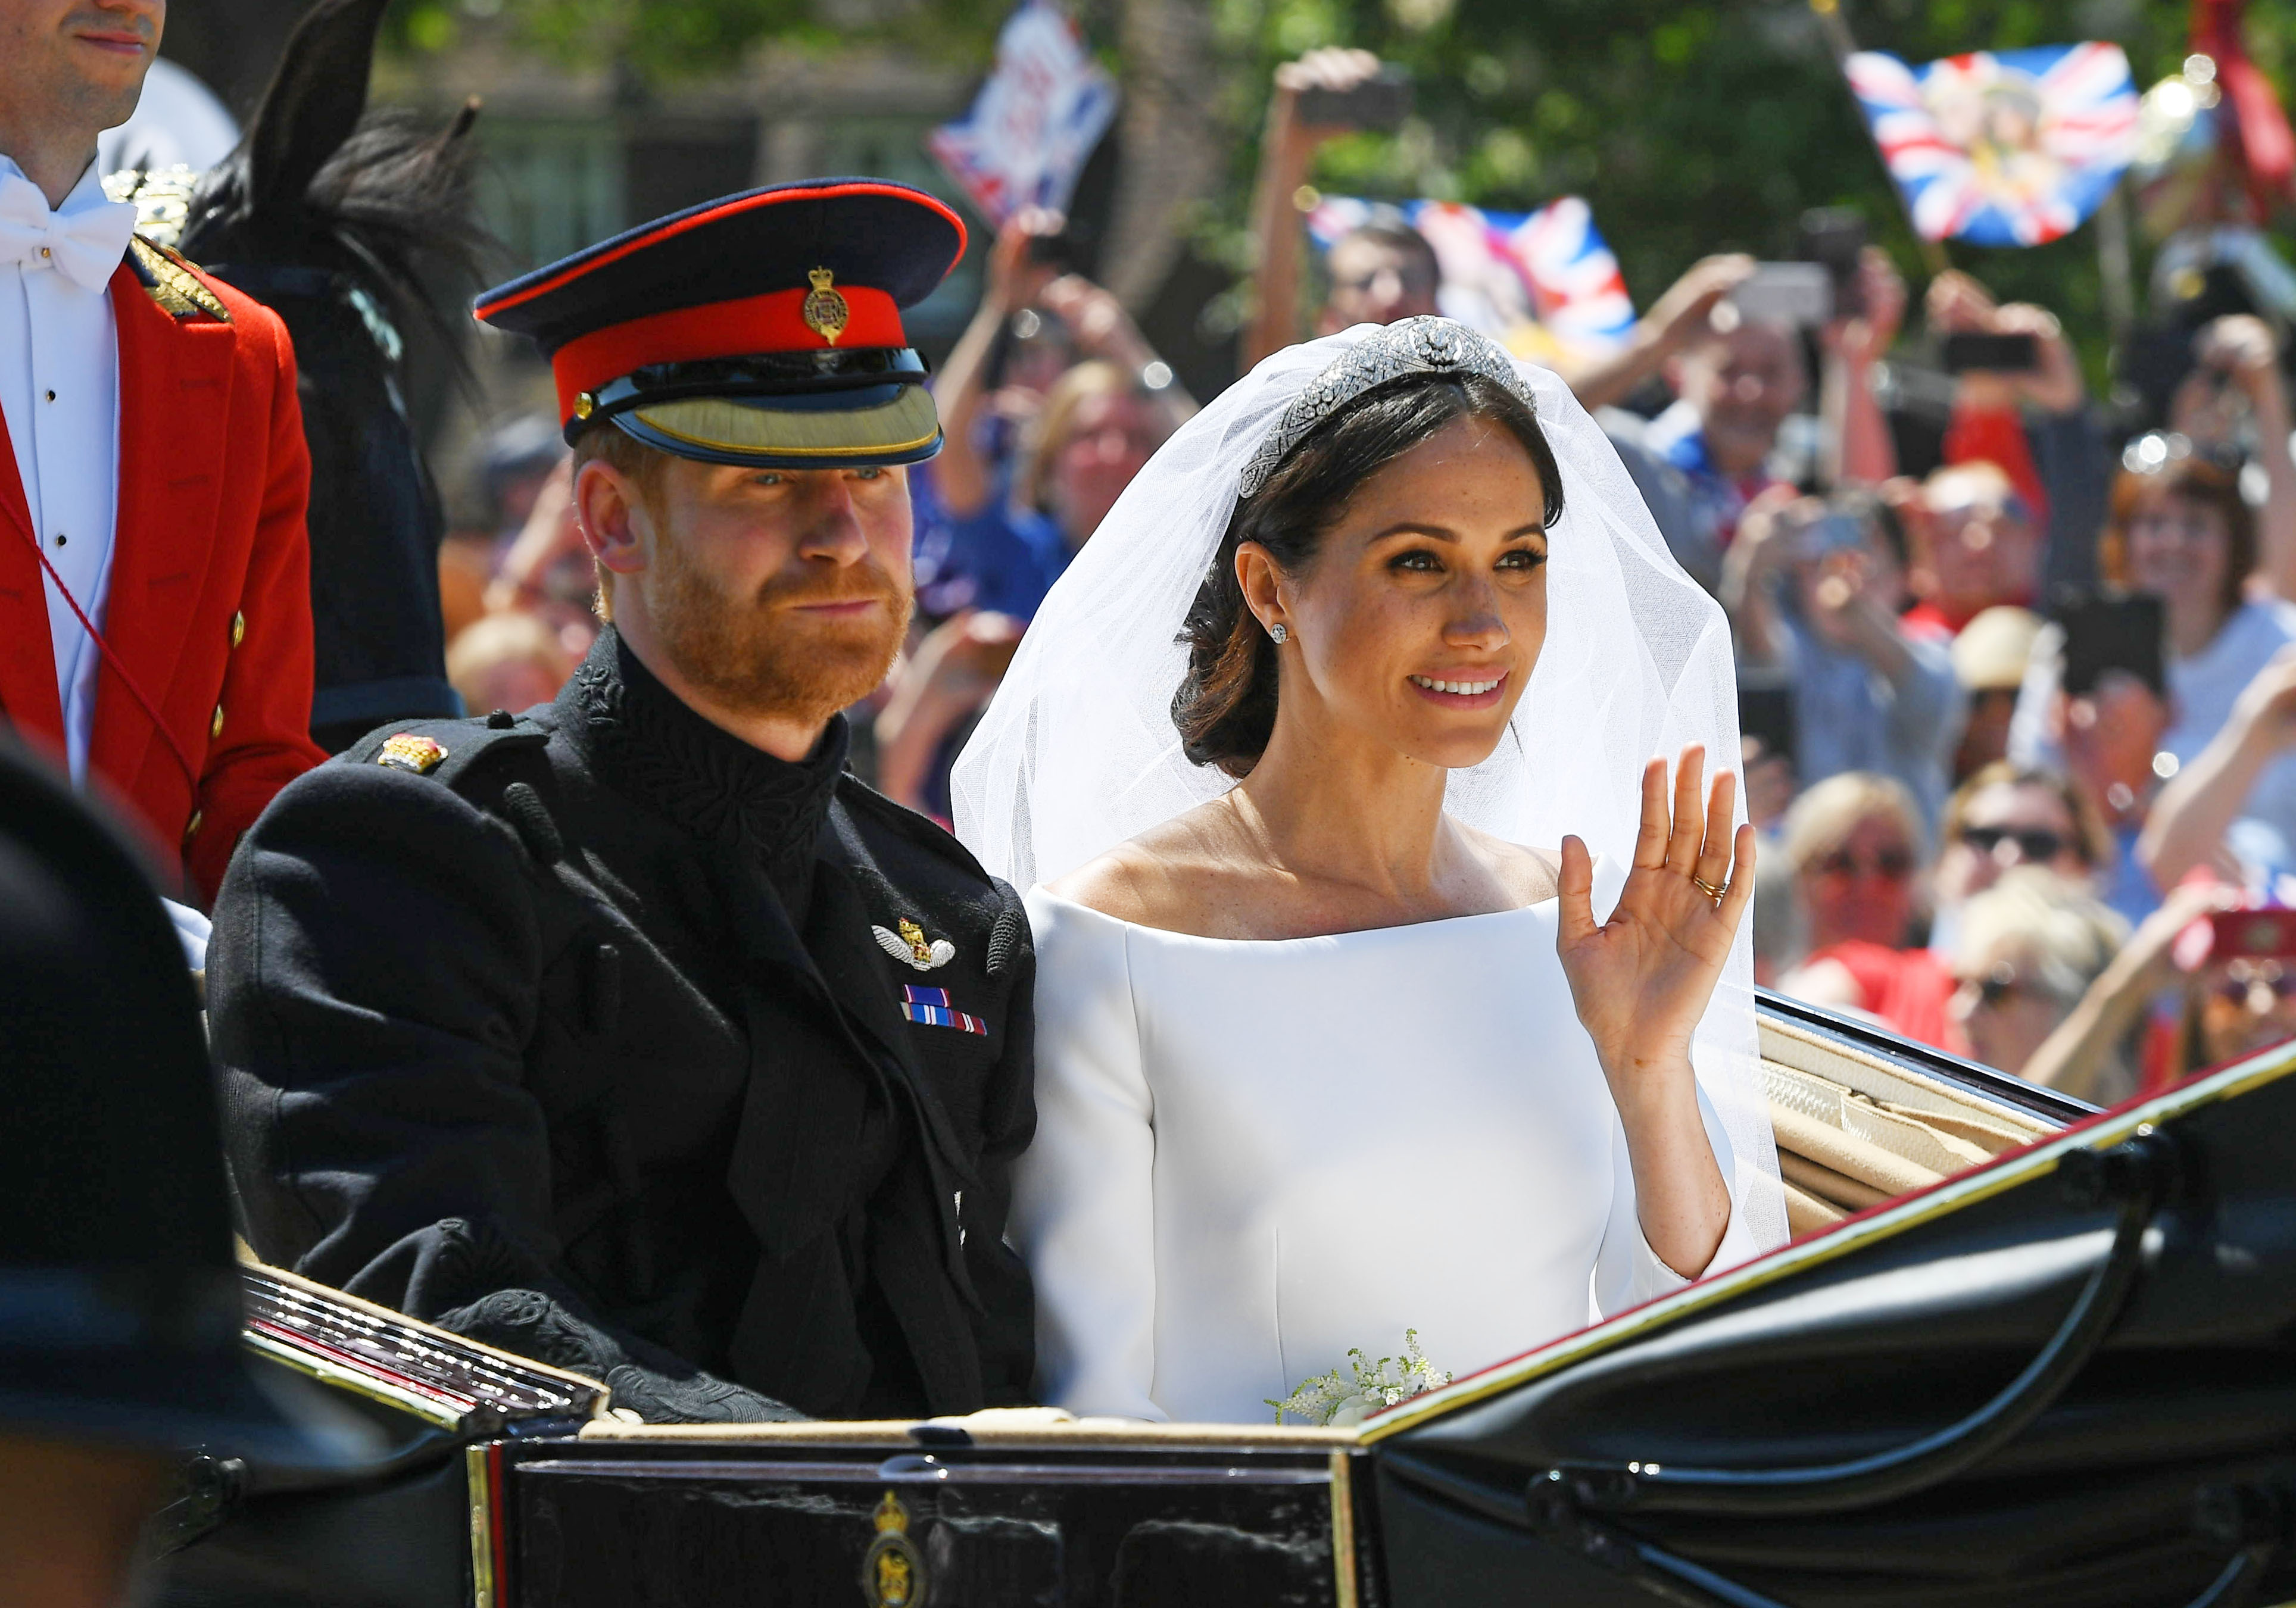 Prince Harry and Meghan Markle ride in a carriage at the royal wedding